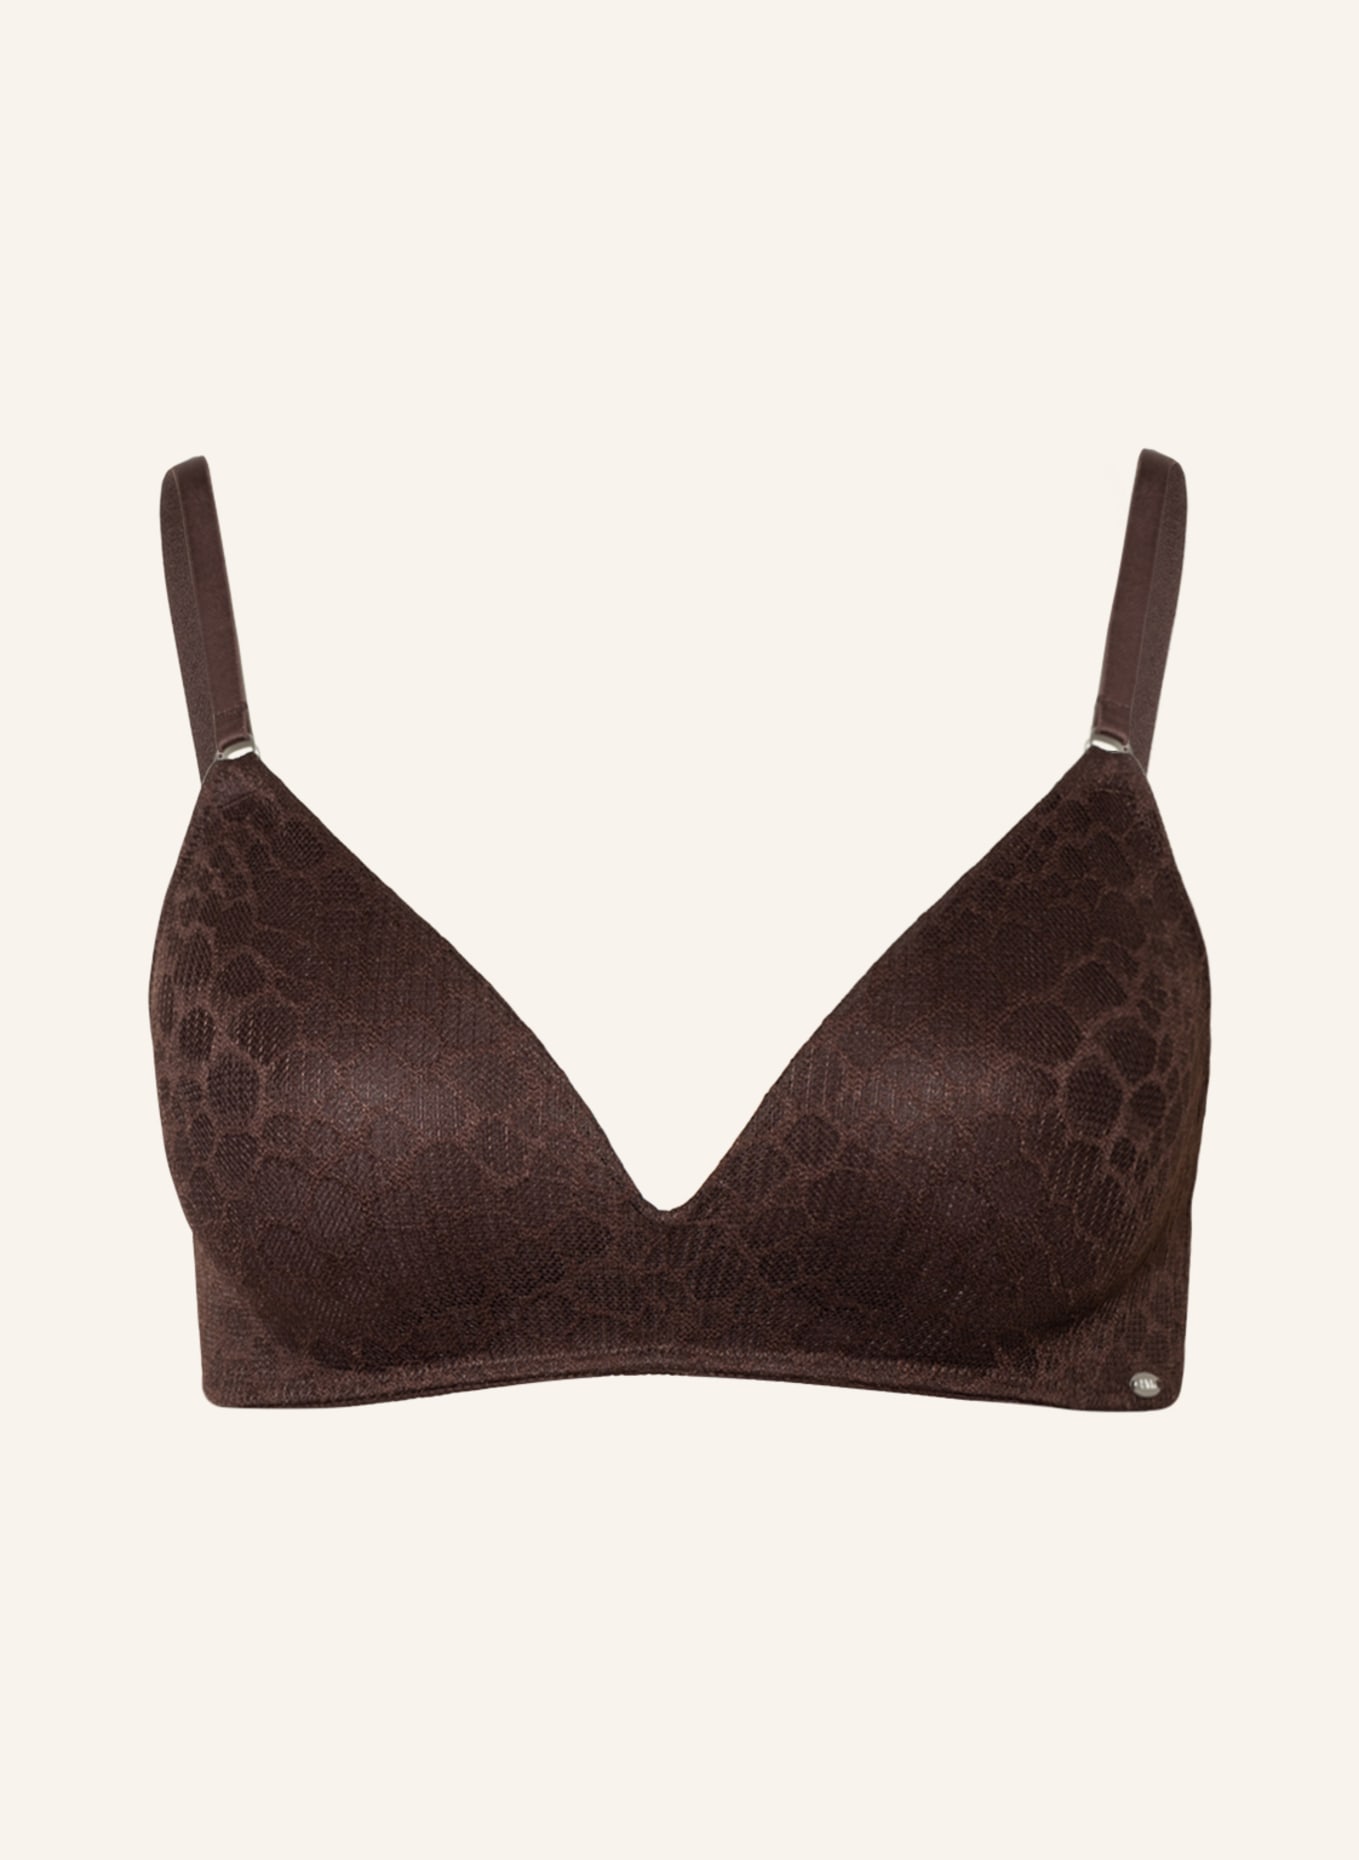 Skiny Triangel-BH EVERY DAY IN LACE TEXTURE , Farbe: DUNKELBRAUN (Bild 1)